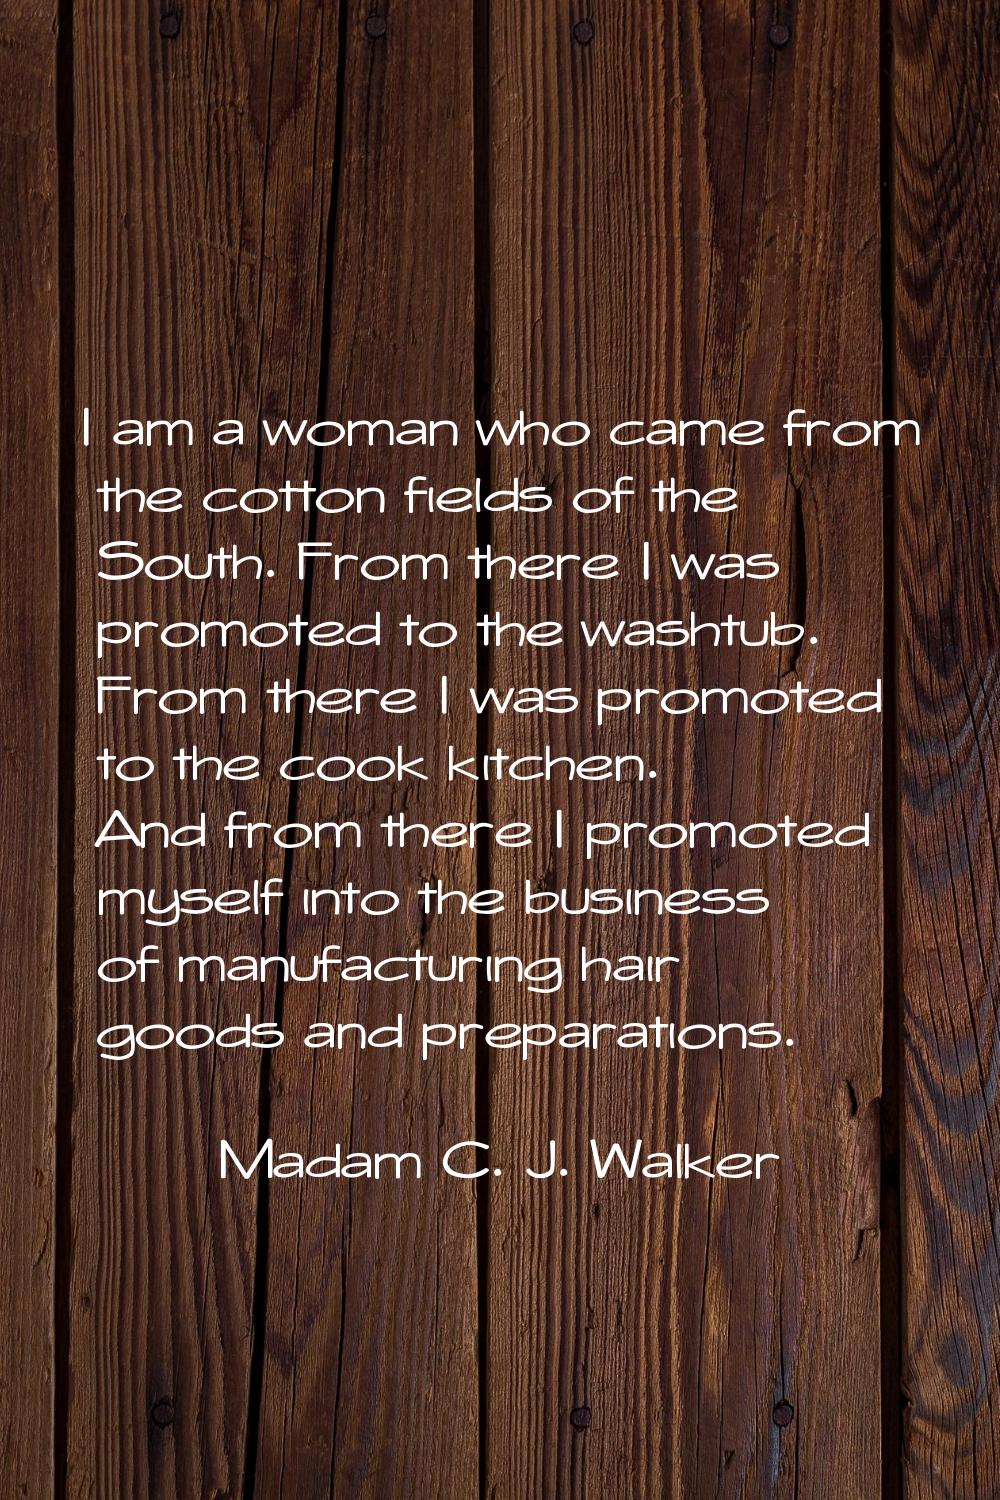 I am a woman who came from the cotton fields of the South. From there I was promoted to the washtub